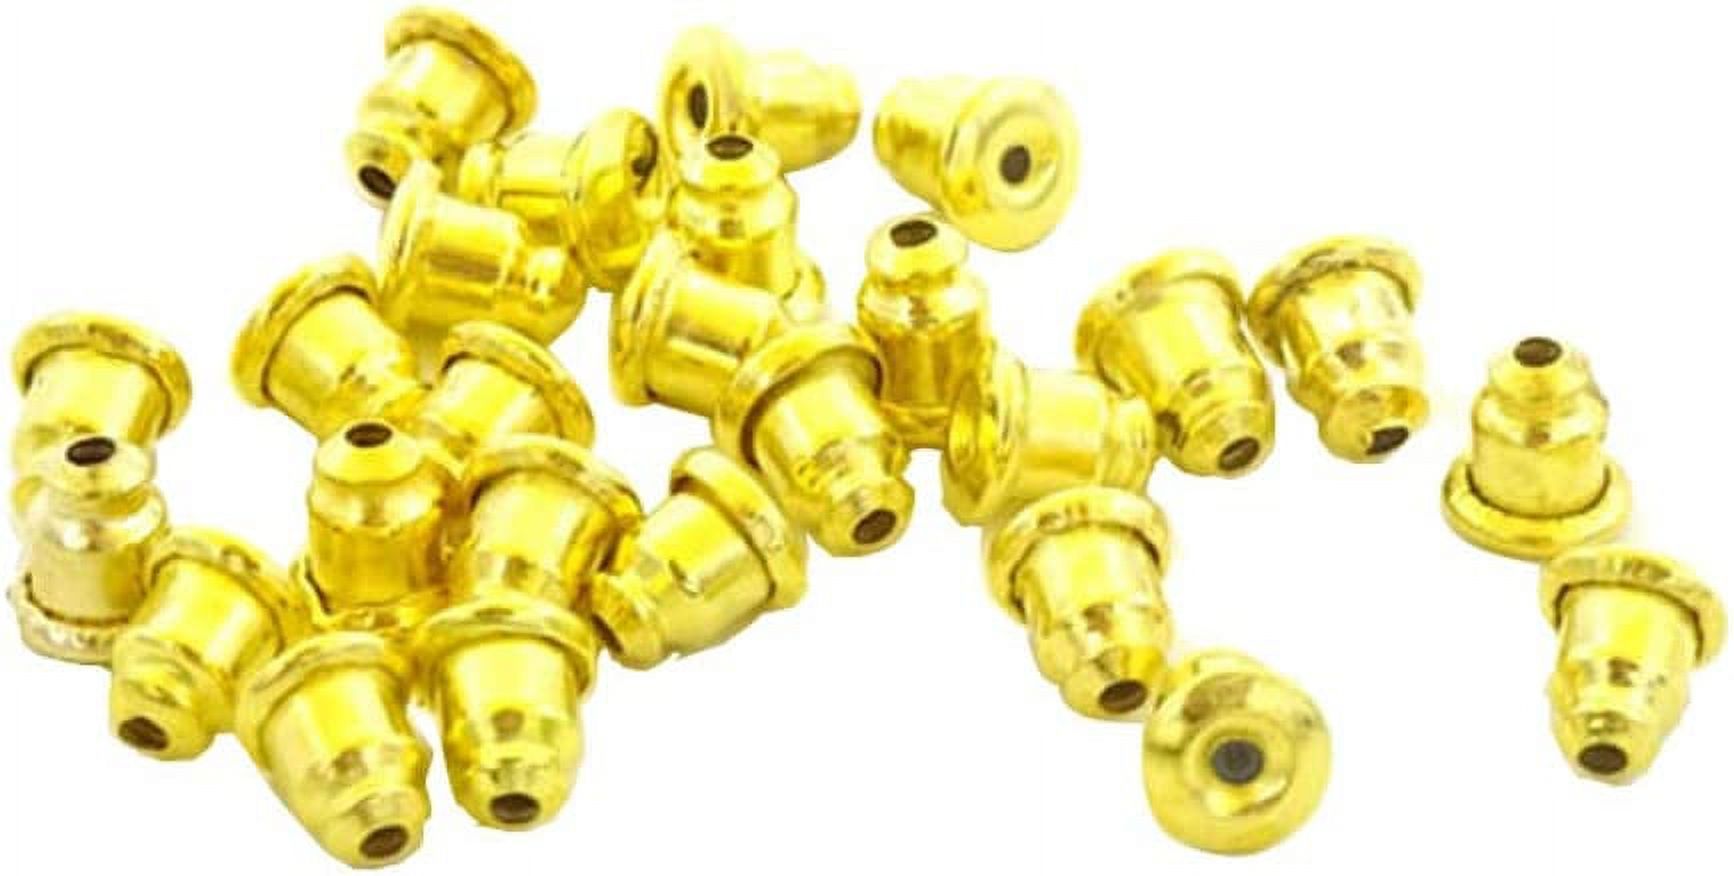 Stainless Steel Bullet Earnuts Safety Earring Backs Silver and Gold Replacement Secure Ear Locking,600 Pcs - image 1 of 1